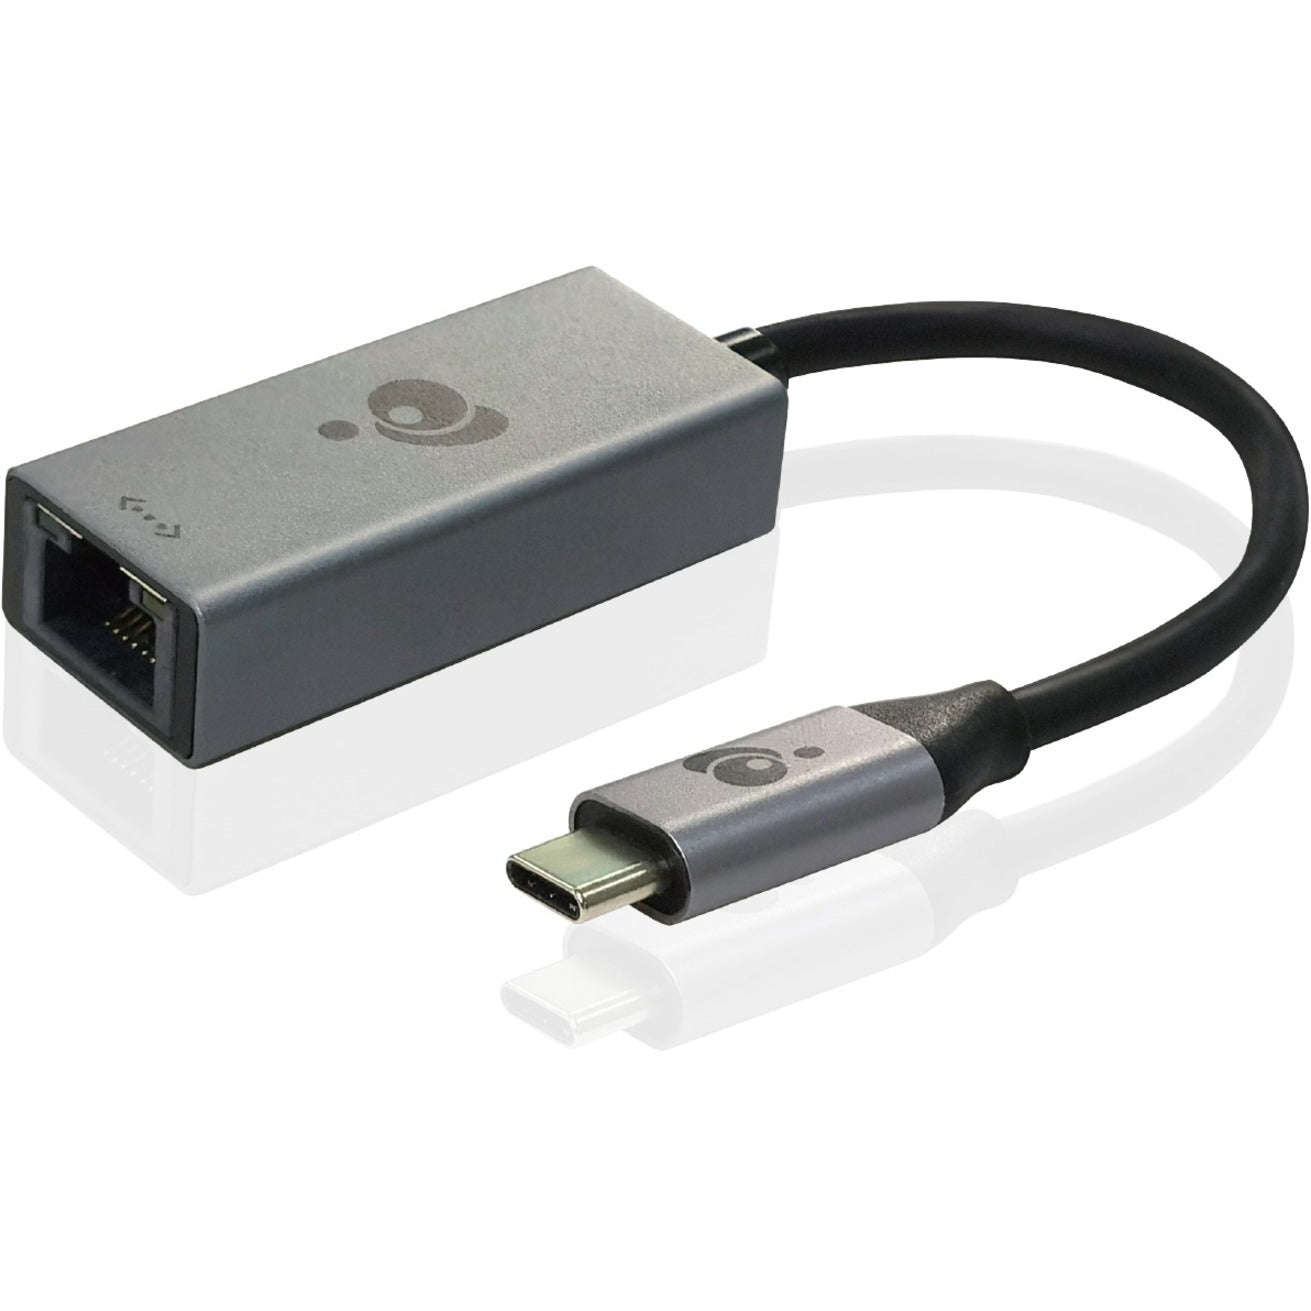 IOGEAR GUC3C01B GigaLinq Pro 3.1 USB 3.1 Type-C to Gigabit Ethernet Adapter, High-Speed Network Connection